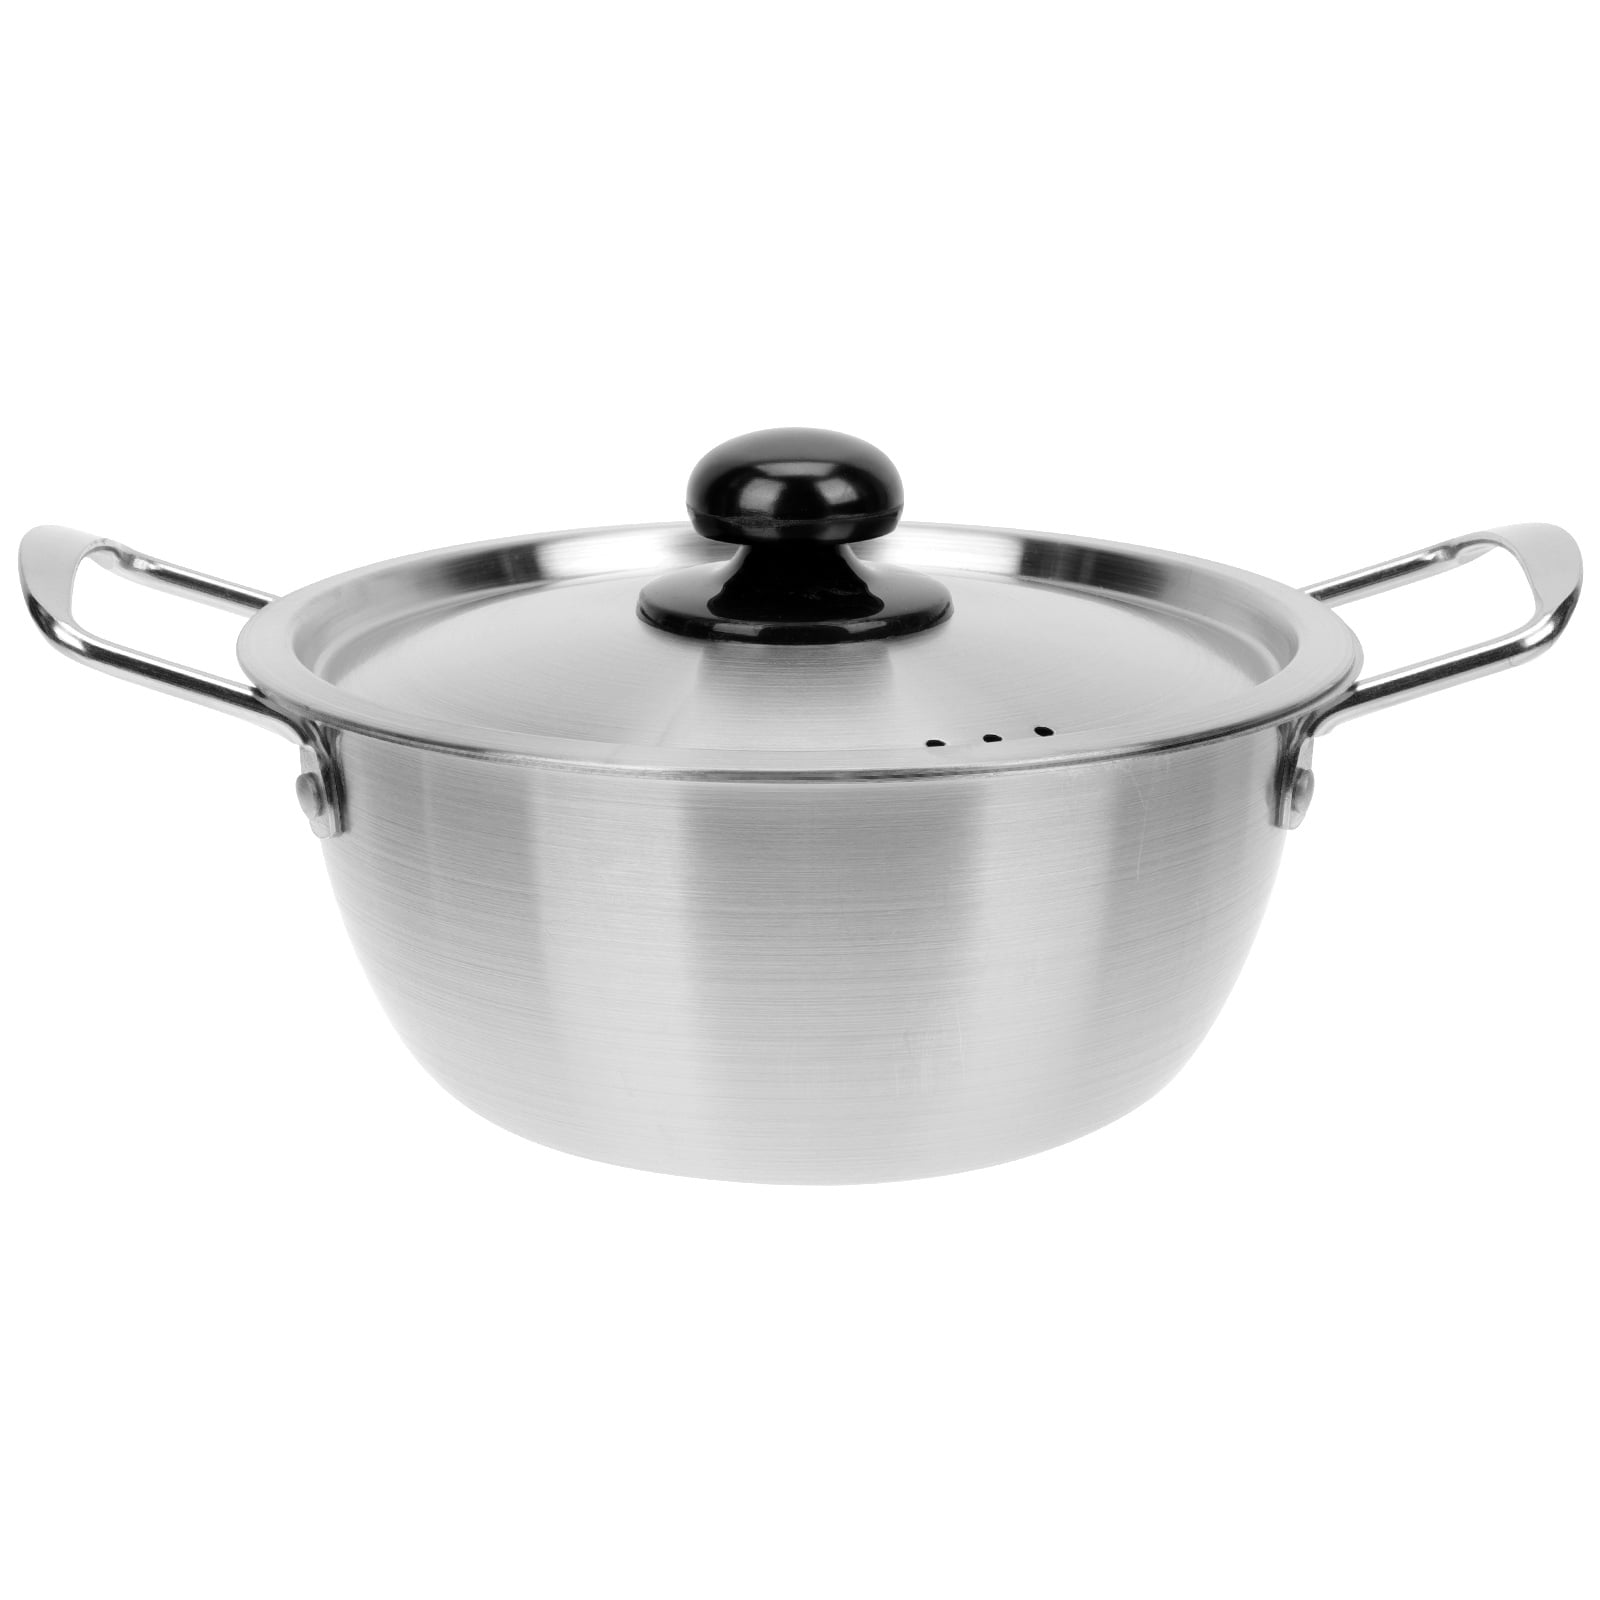 Bentism Stainless Steel Stockpot 42qt Cooking Kitchen Sauce Pot with Strainer Lid, Size: Capacity: 42qt (Approximately 39.7L)